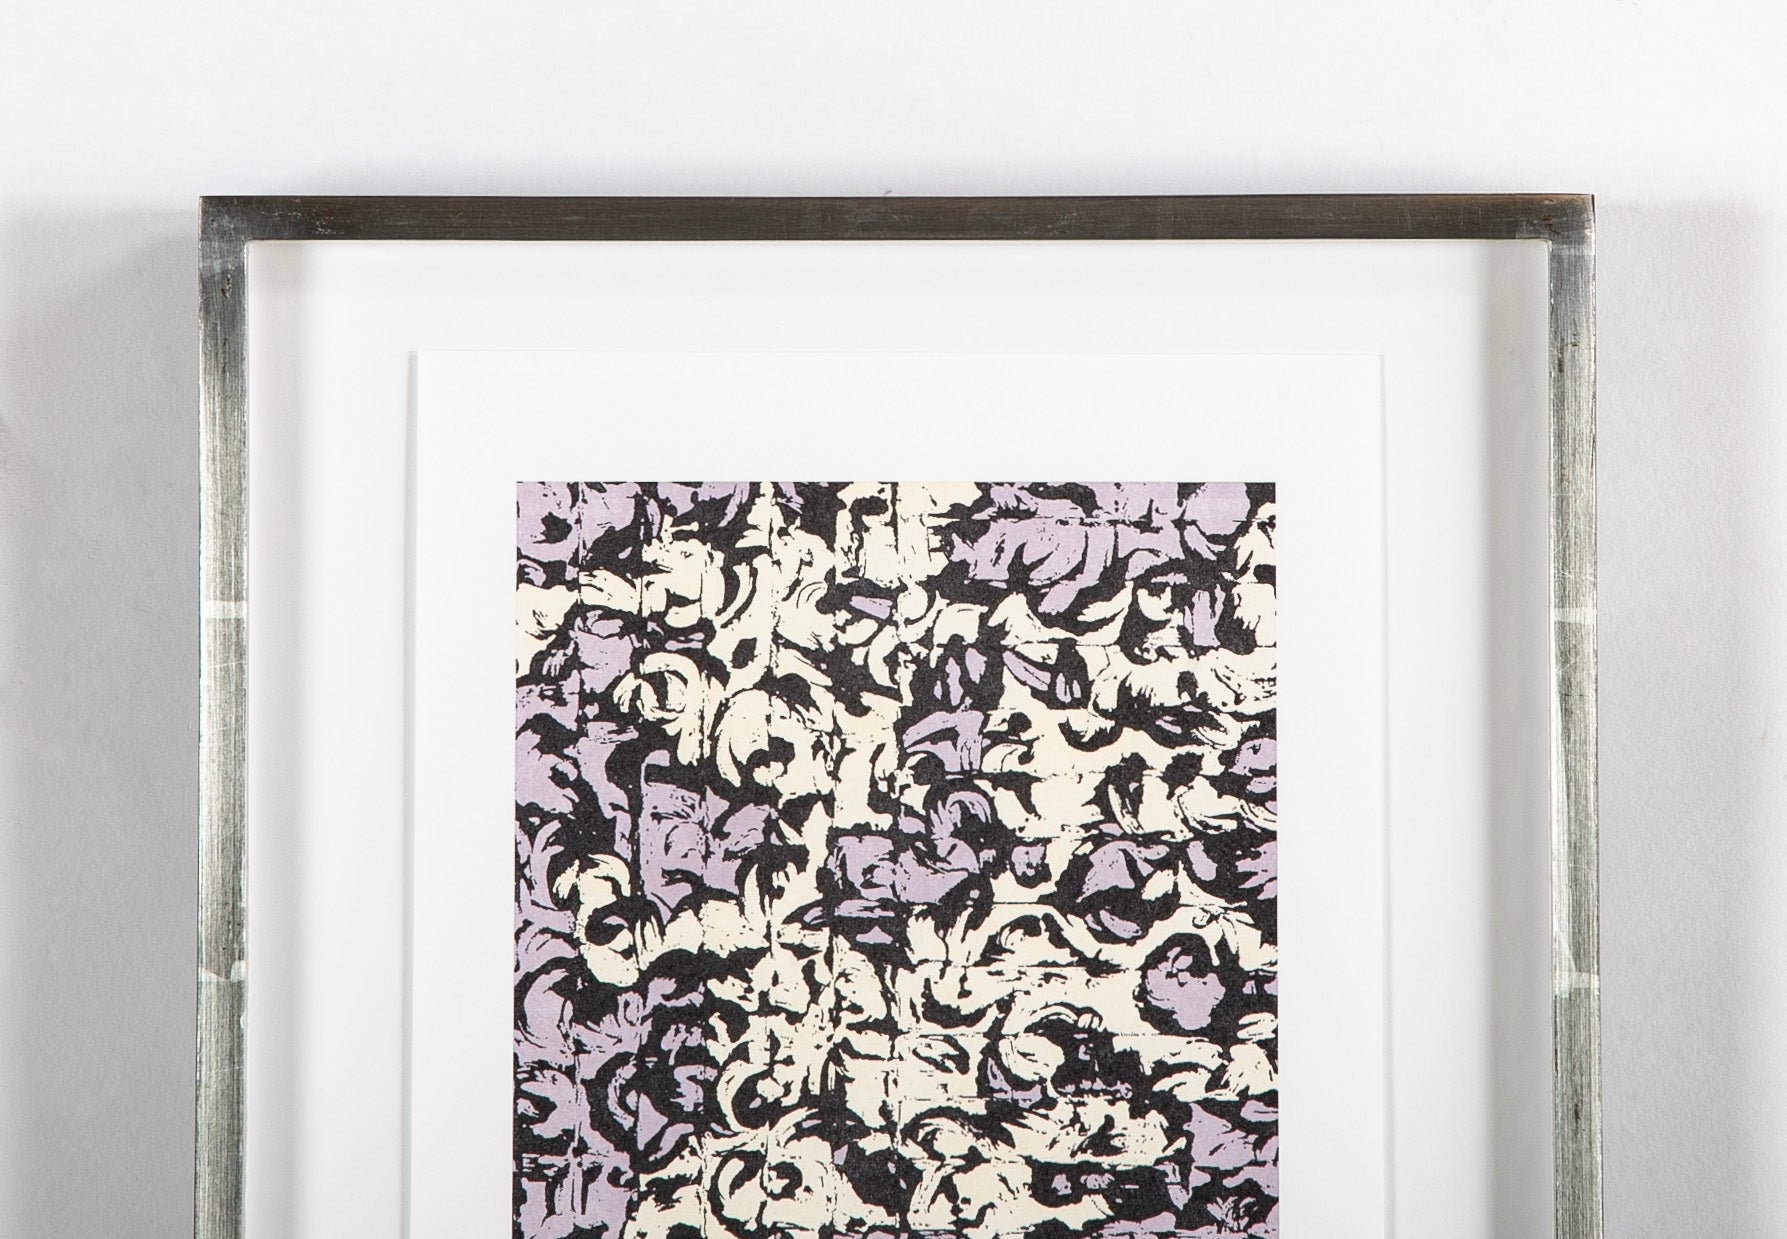 Julian Lethbridge 16 Color Relief Prints for "What the End is For"    Priced Individually